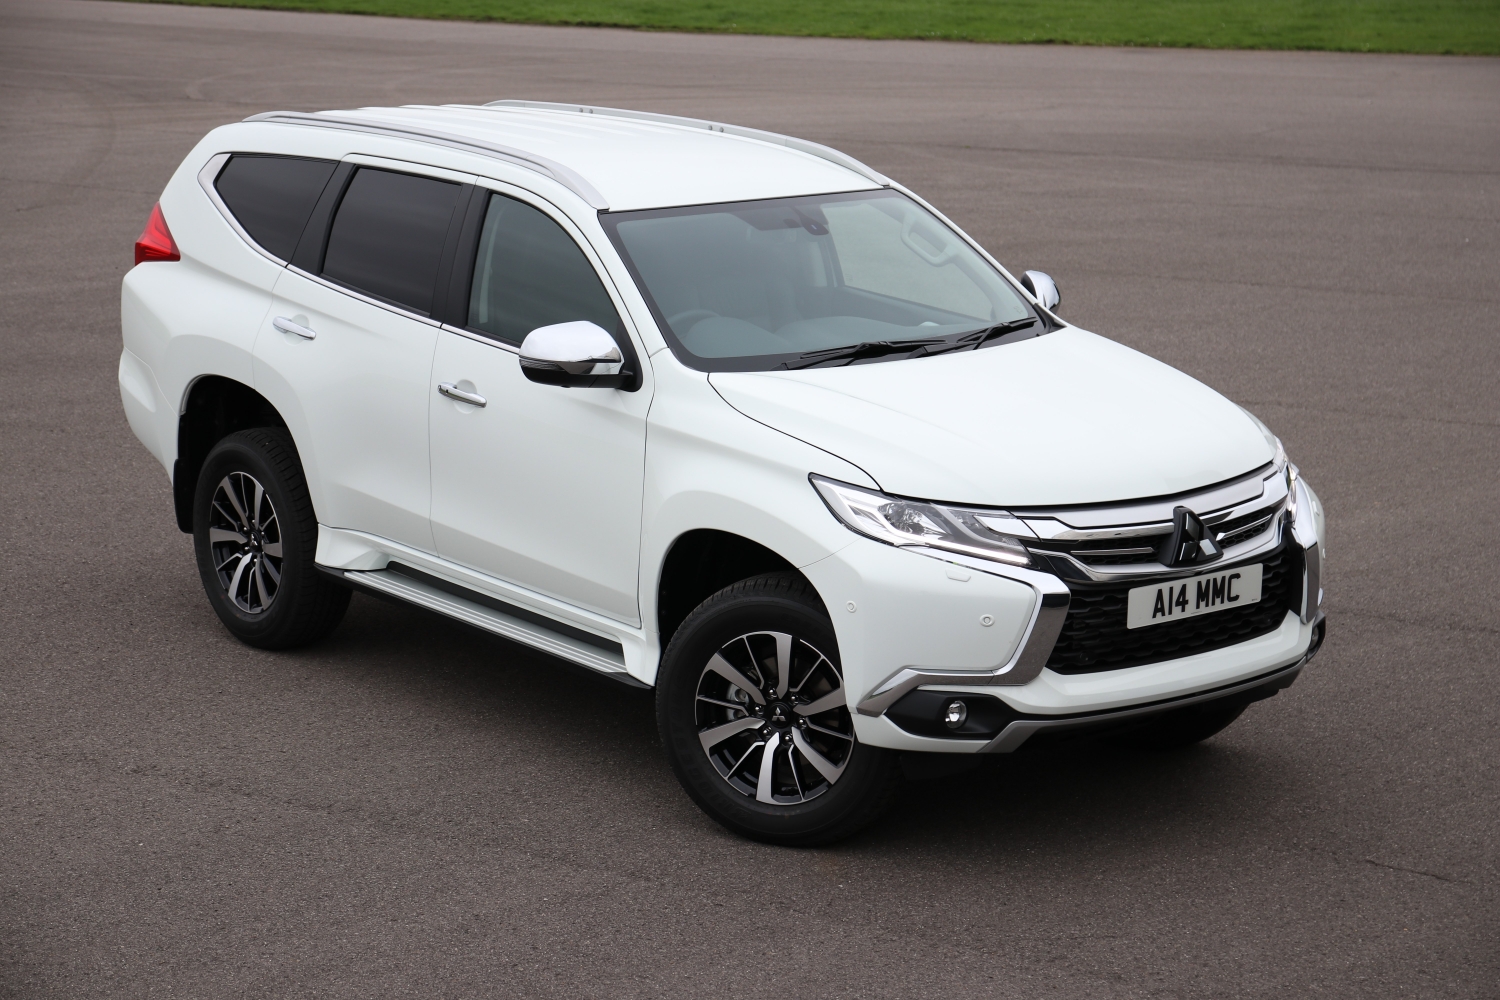 2seat Mitsubishi Pajero Sport variant launched in the UK